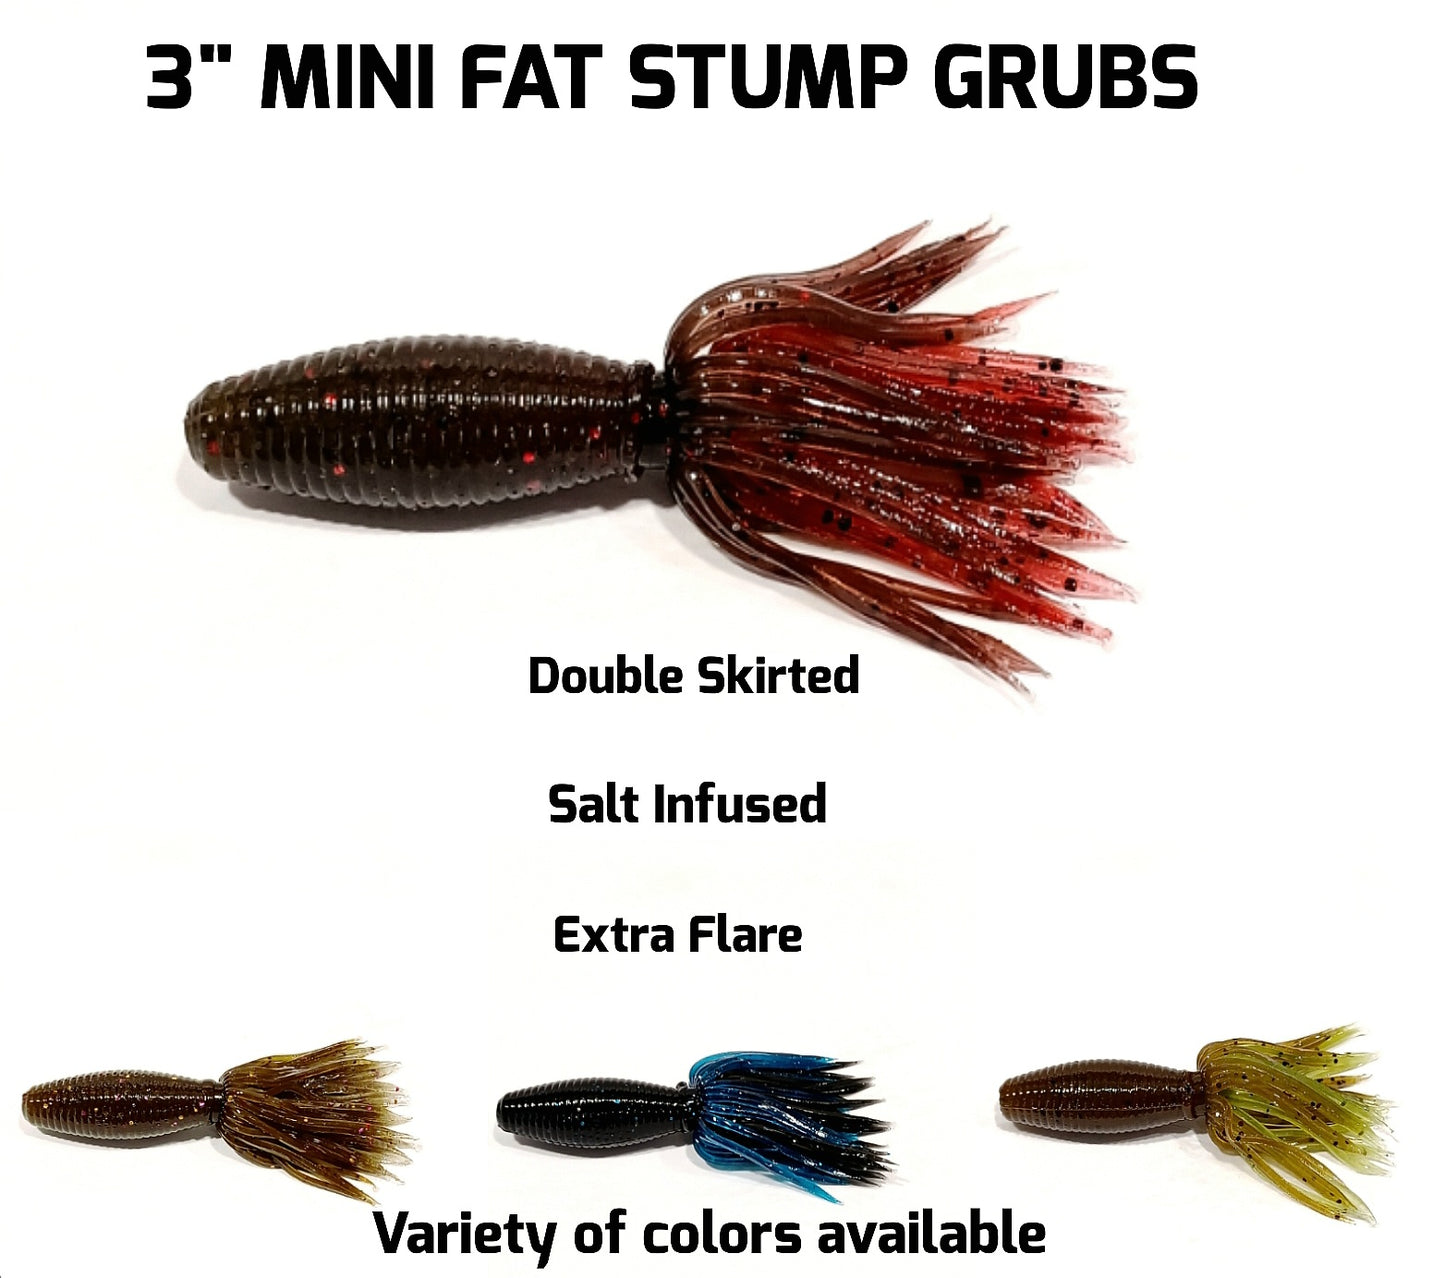 "MINI" FAT STUMP (double skirted grub) variety of colors available